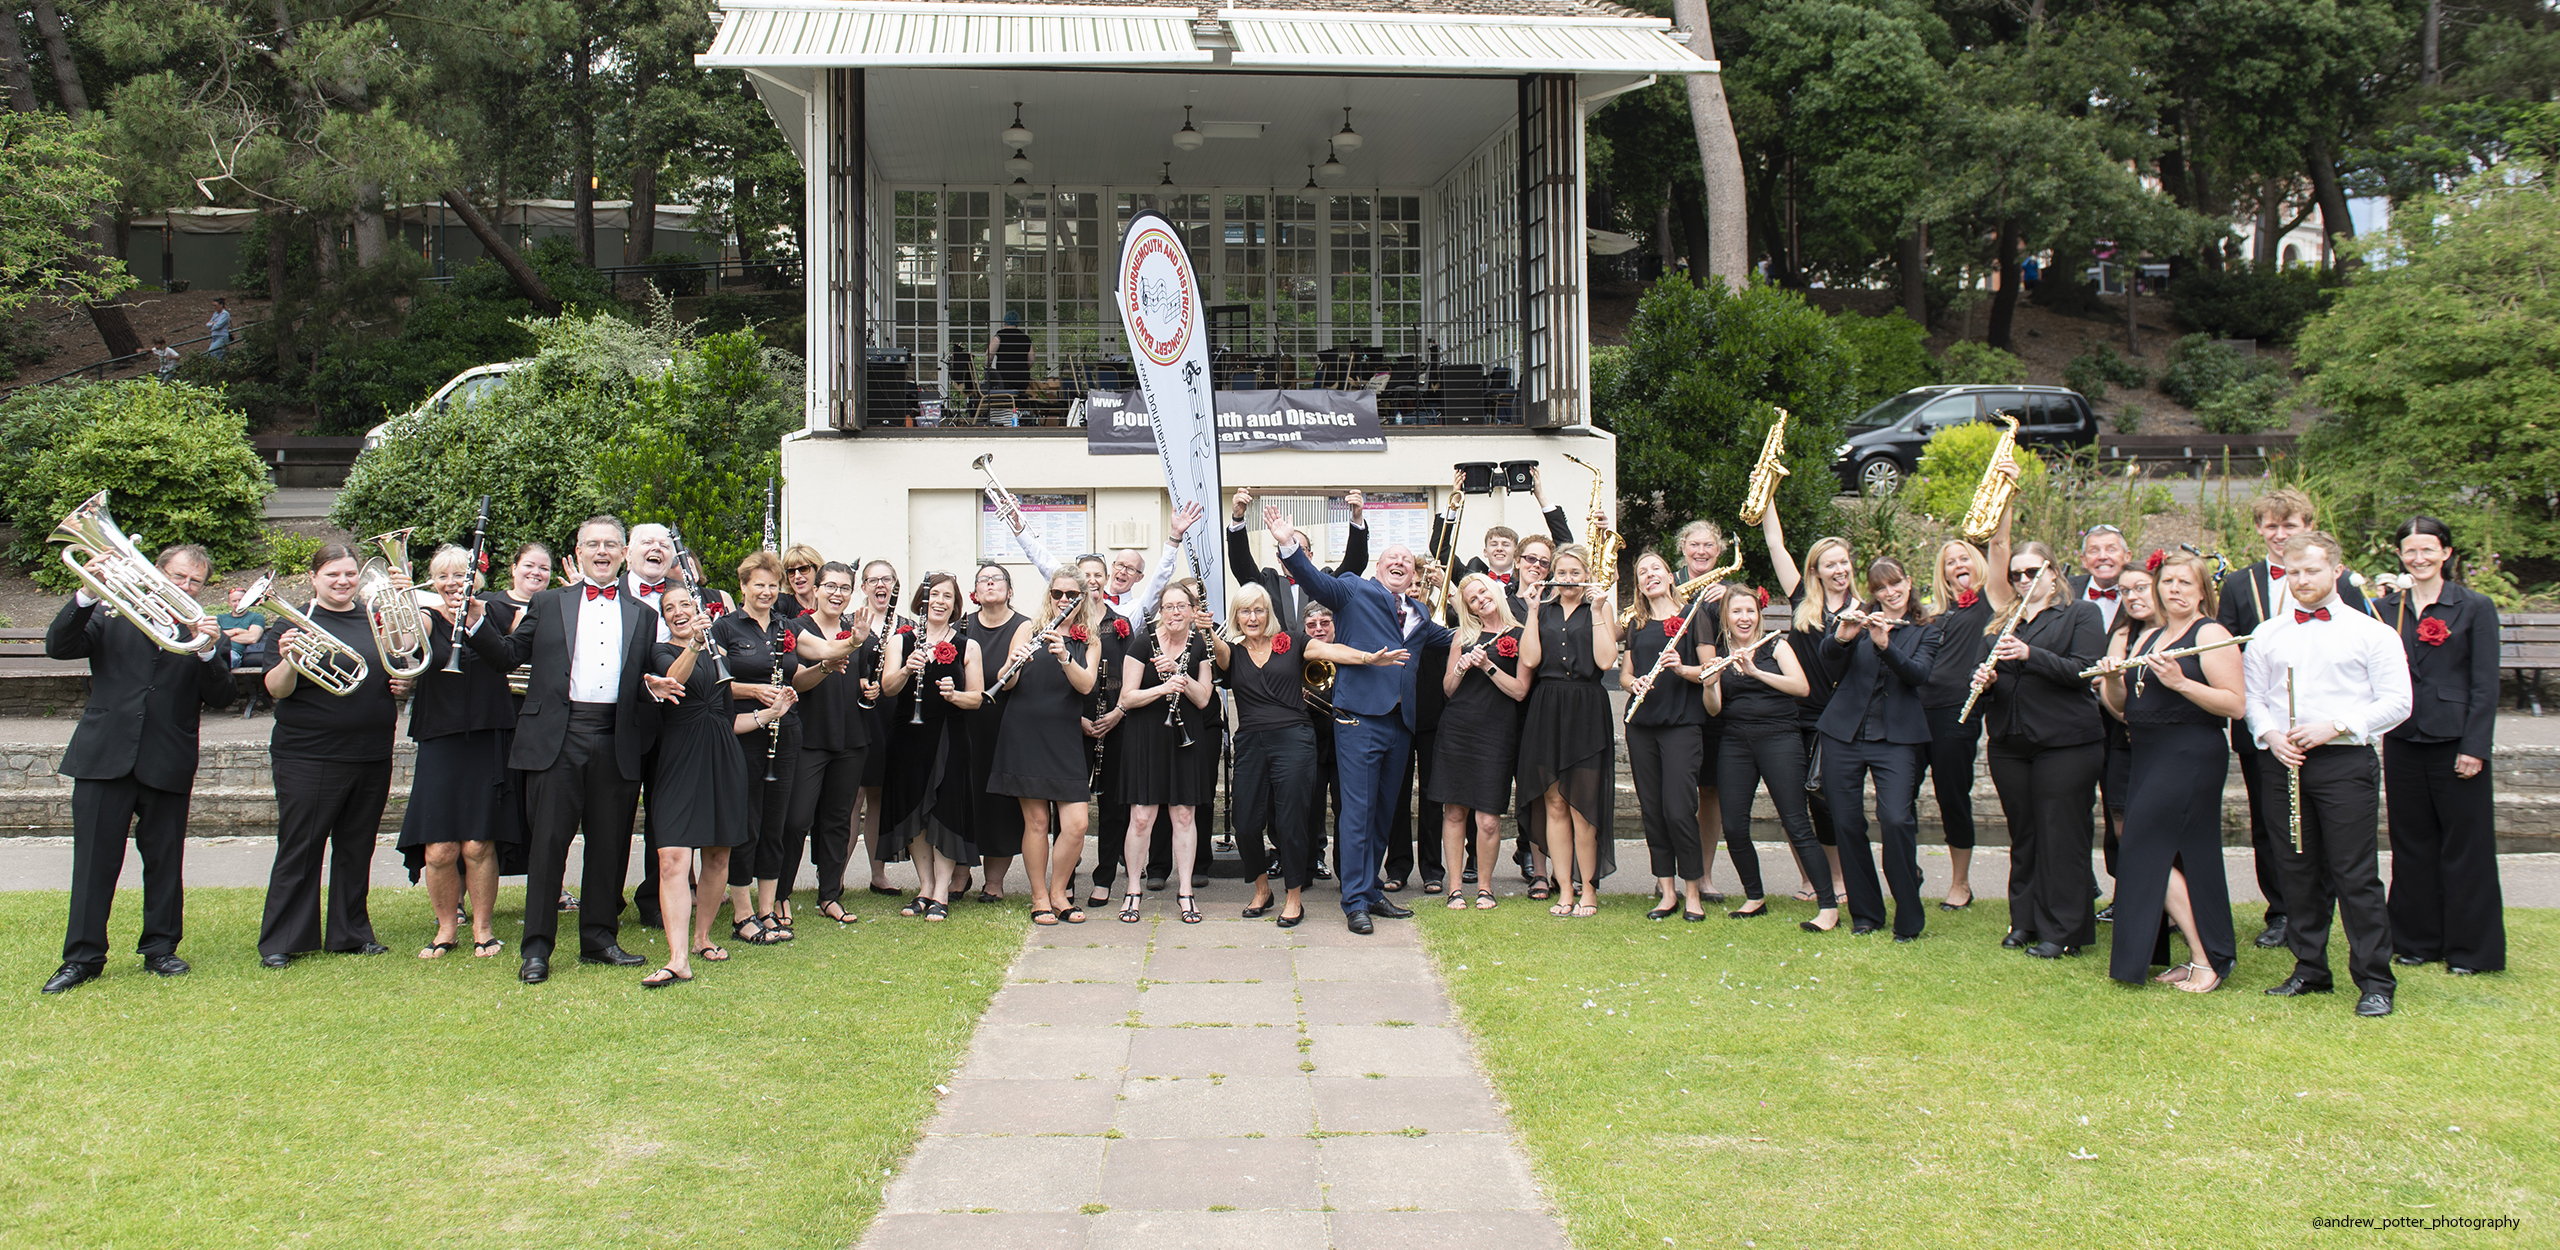 Bournemouth and District Concert Band standing in front of bandstand in Bournemouth gardens